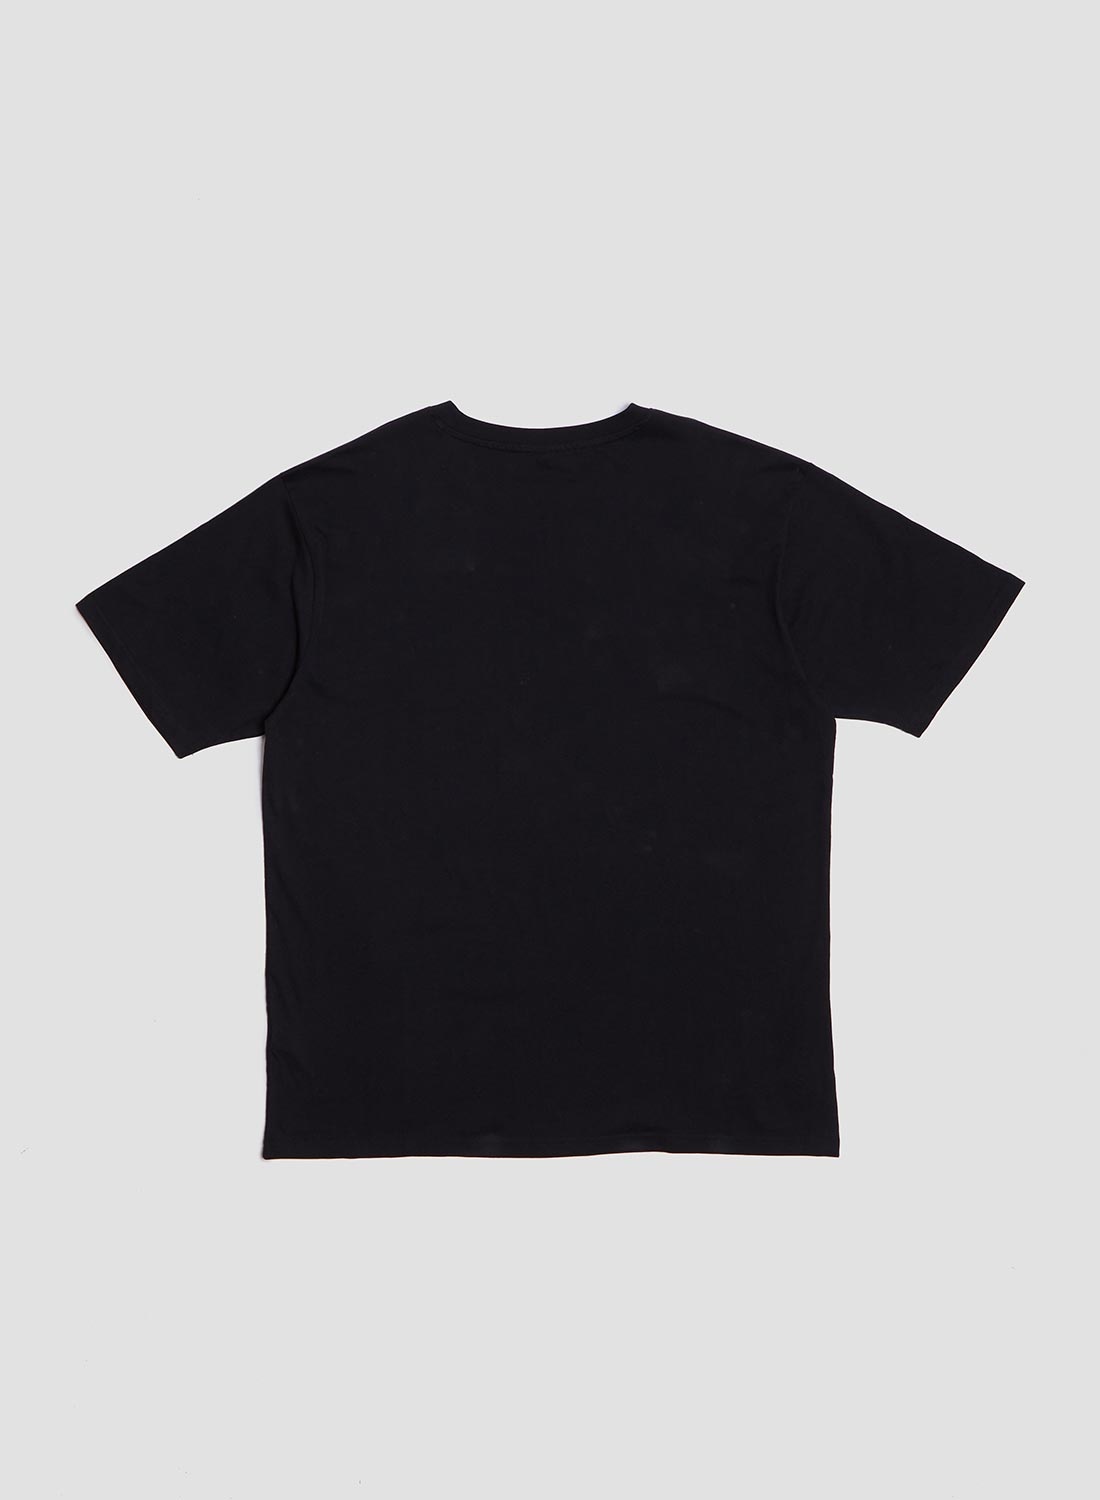 Embroidered Relaxed Fit Tee in Black - 3